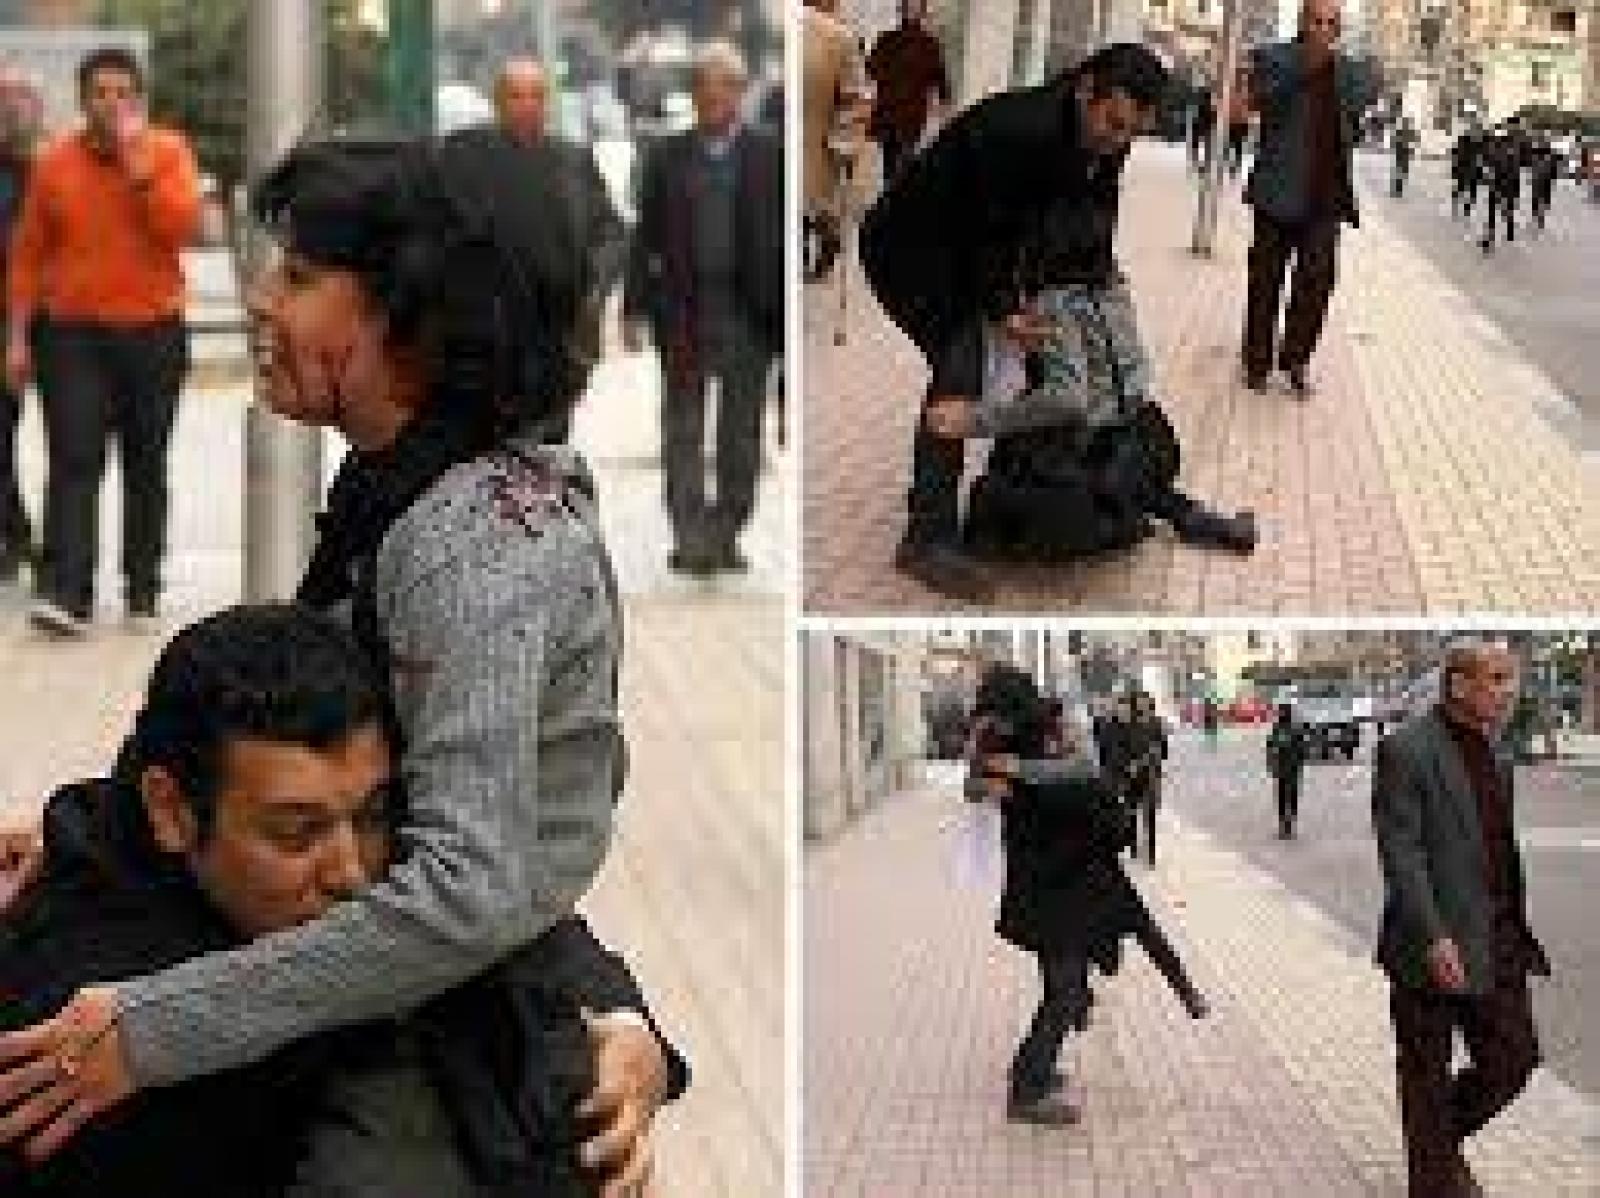 Shaima al-Sabbagh: Heartbreaking picture shows moments of panic after leading Egyptian female protester dies after being 'shot by police'